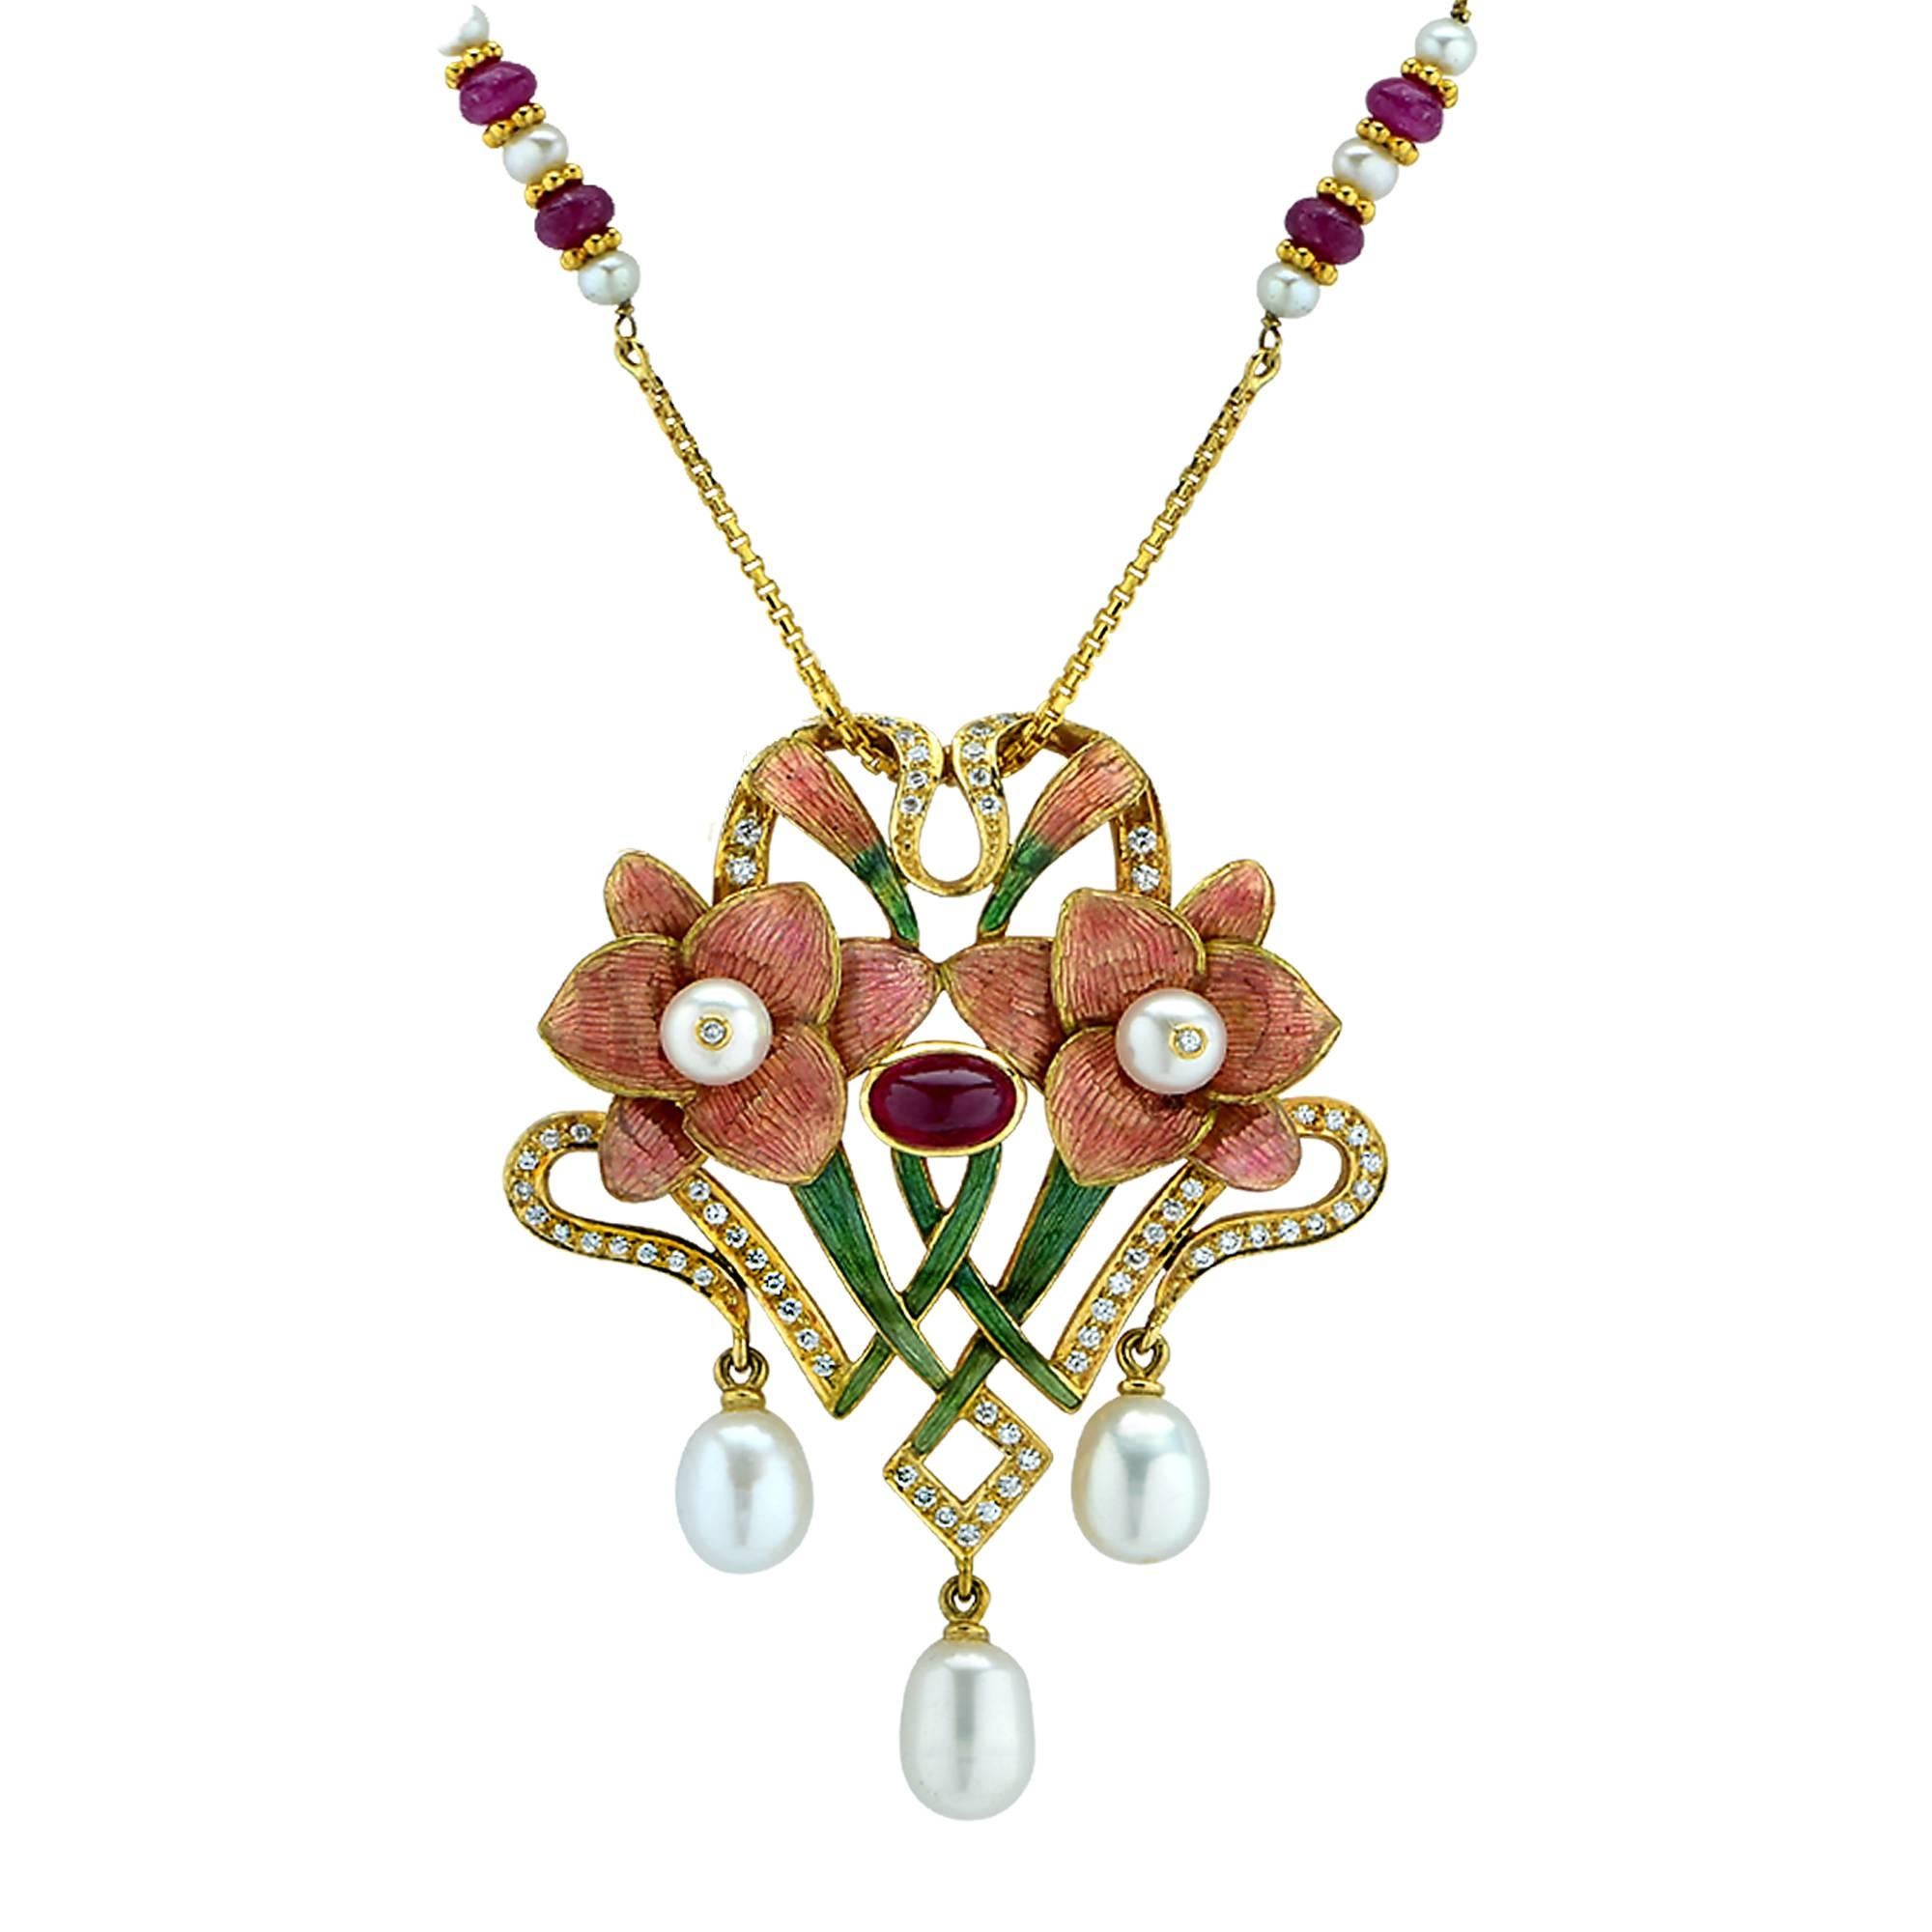 This artistically crafted 18k Yellow Gold necklace and earring set is a true work of art. Enamel, pearls, rubies and approximately .50cts of round brilliant cut diamonds G color VS clarity are expertly combined and crafted into a pendant and earring